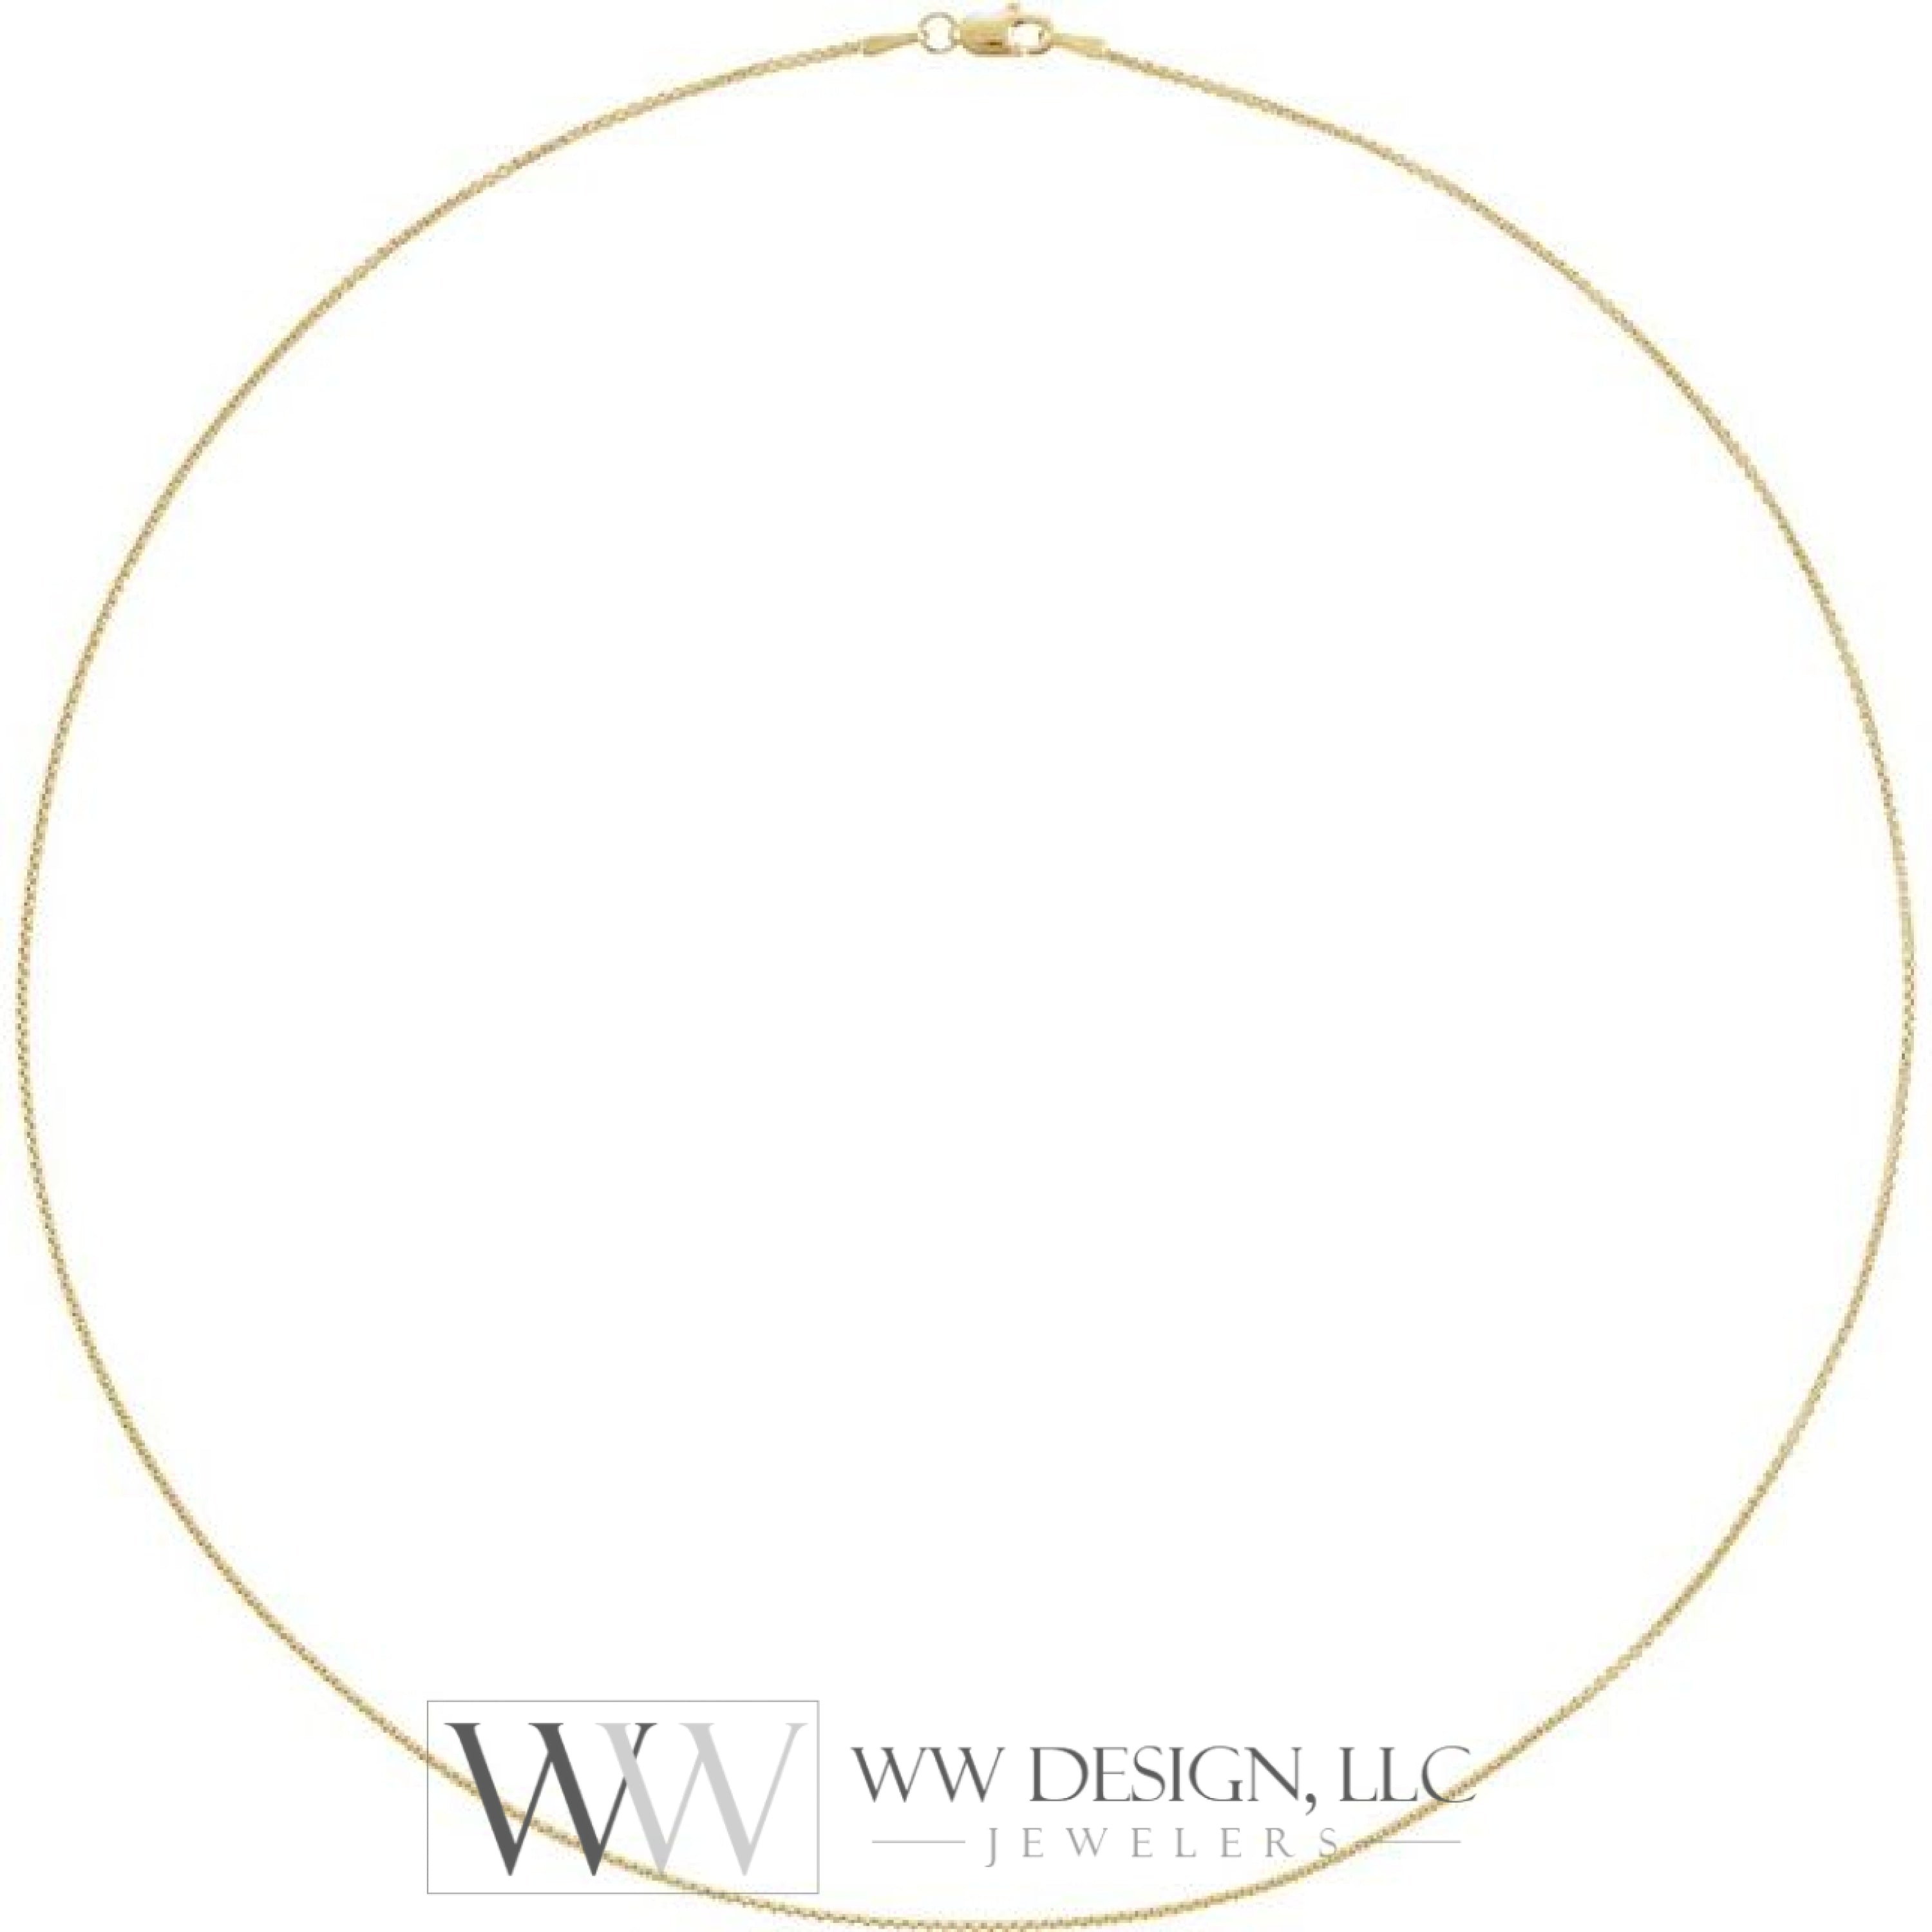 1mm Rounded Box Chain Bracelet or Necklace - 14k Gold (Y, R), or Sterling Silver